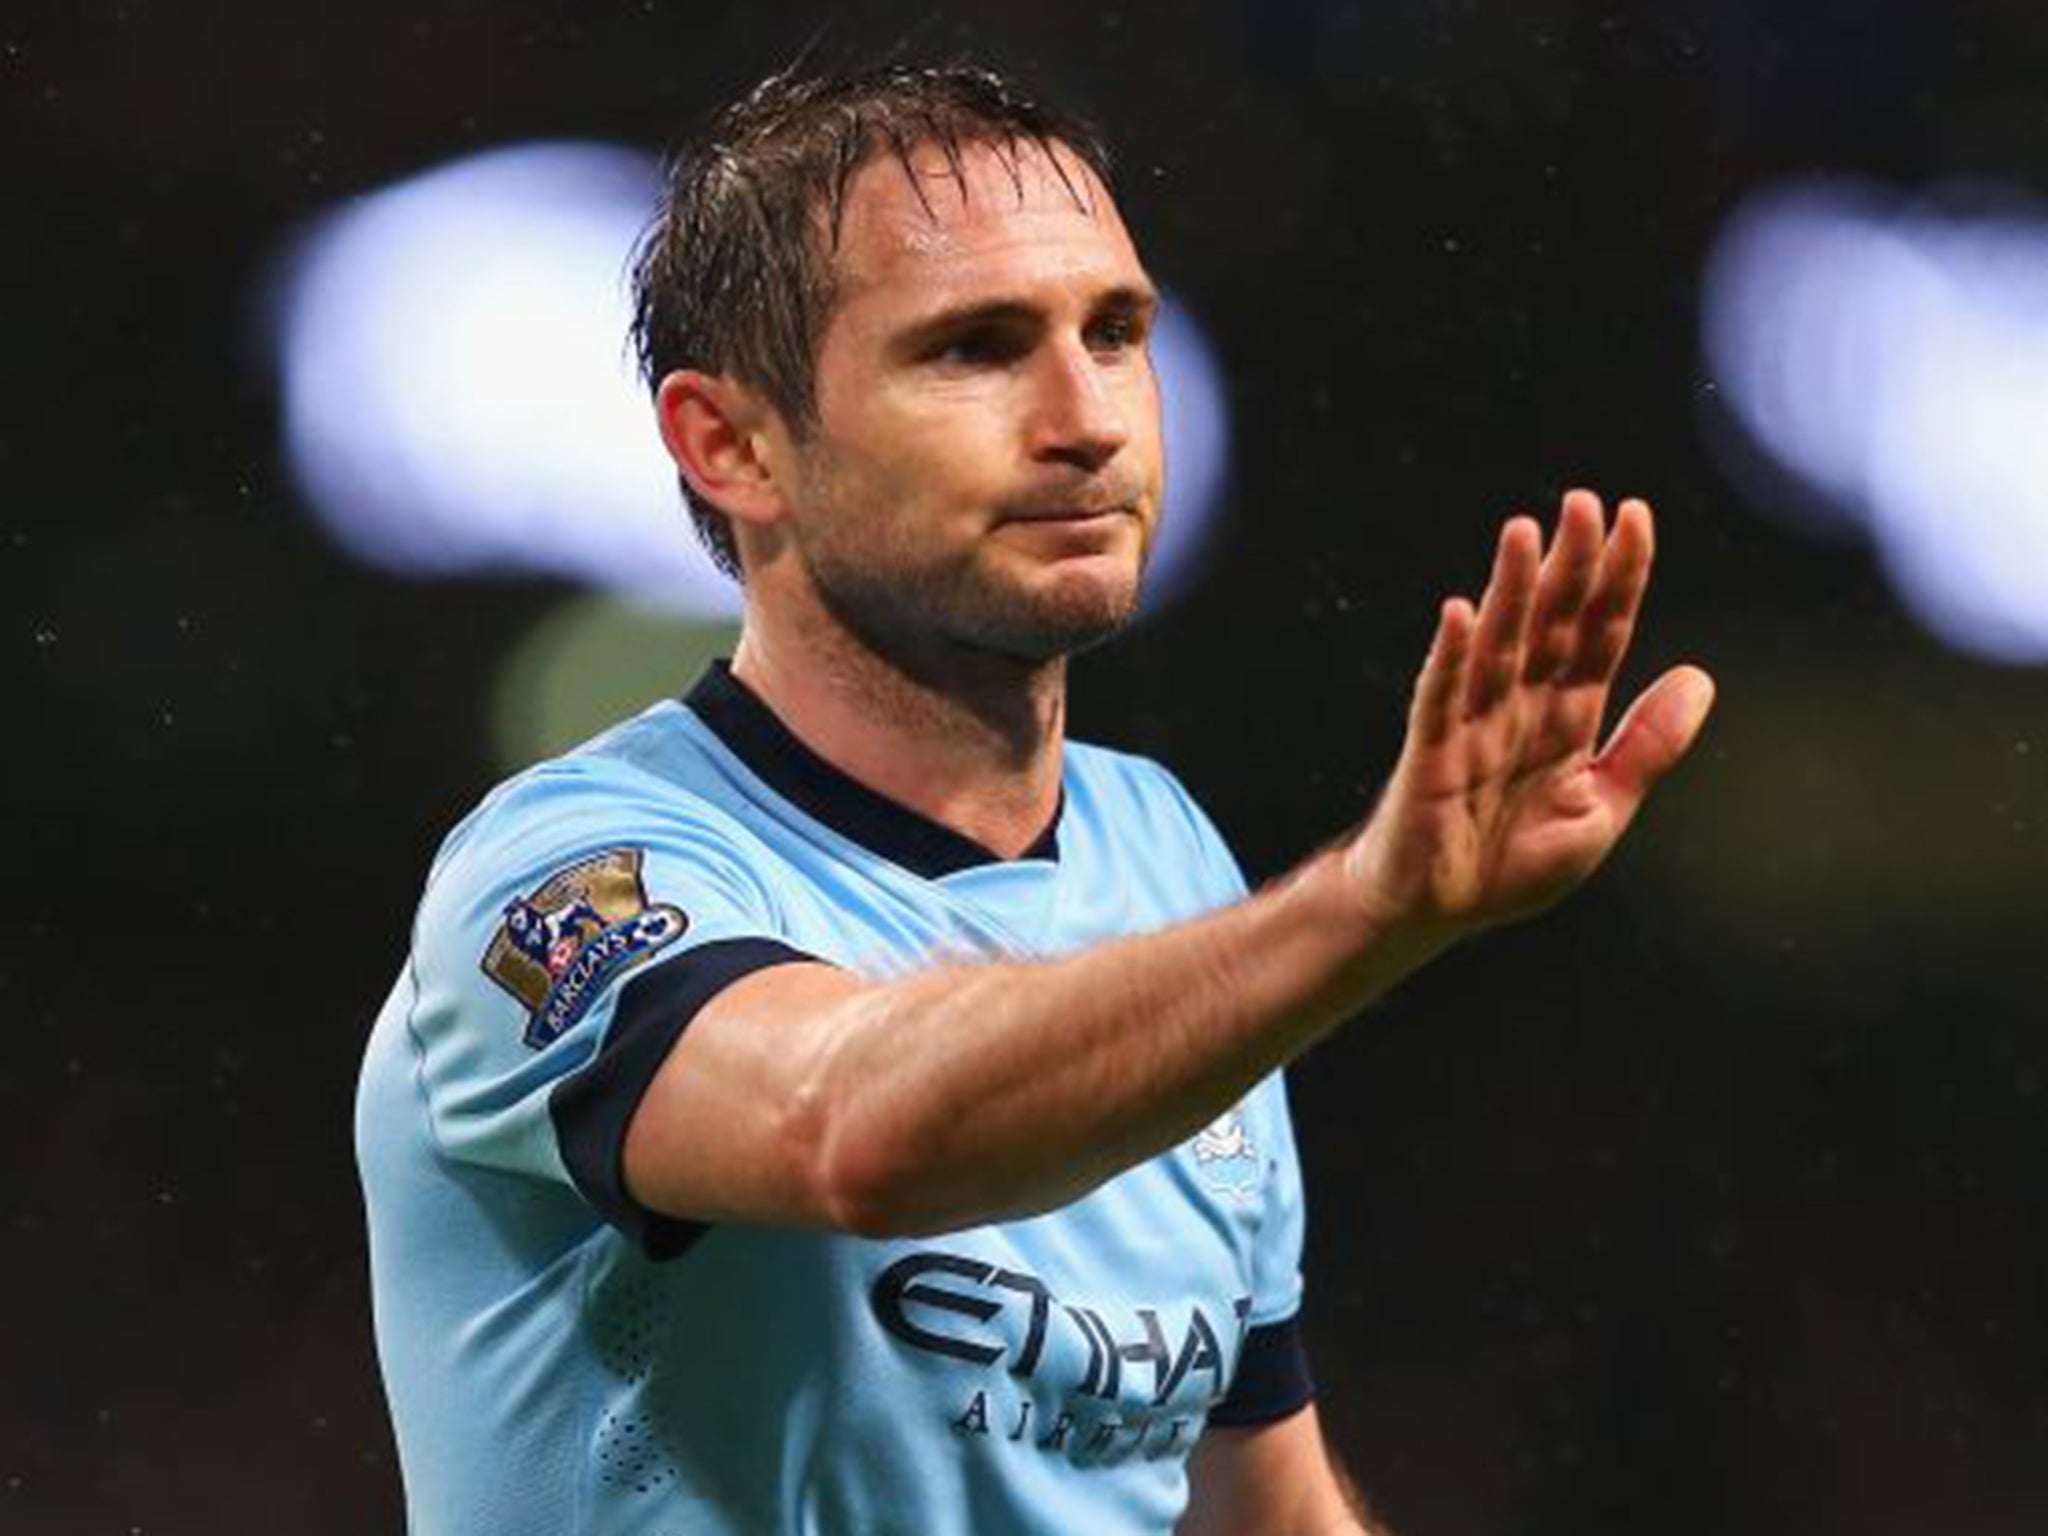 Frank Lampard gave an interview at the weekend that implied City were to blame for the mix-up (Getty)